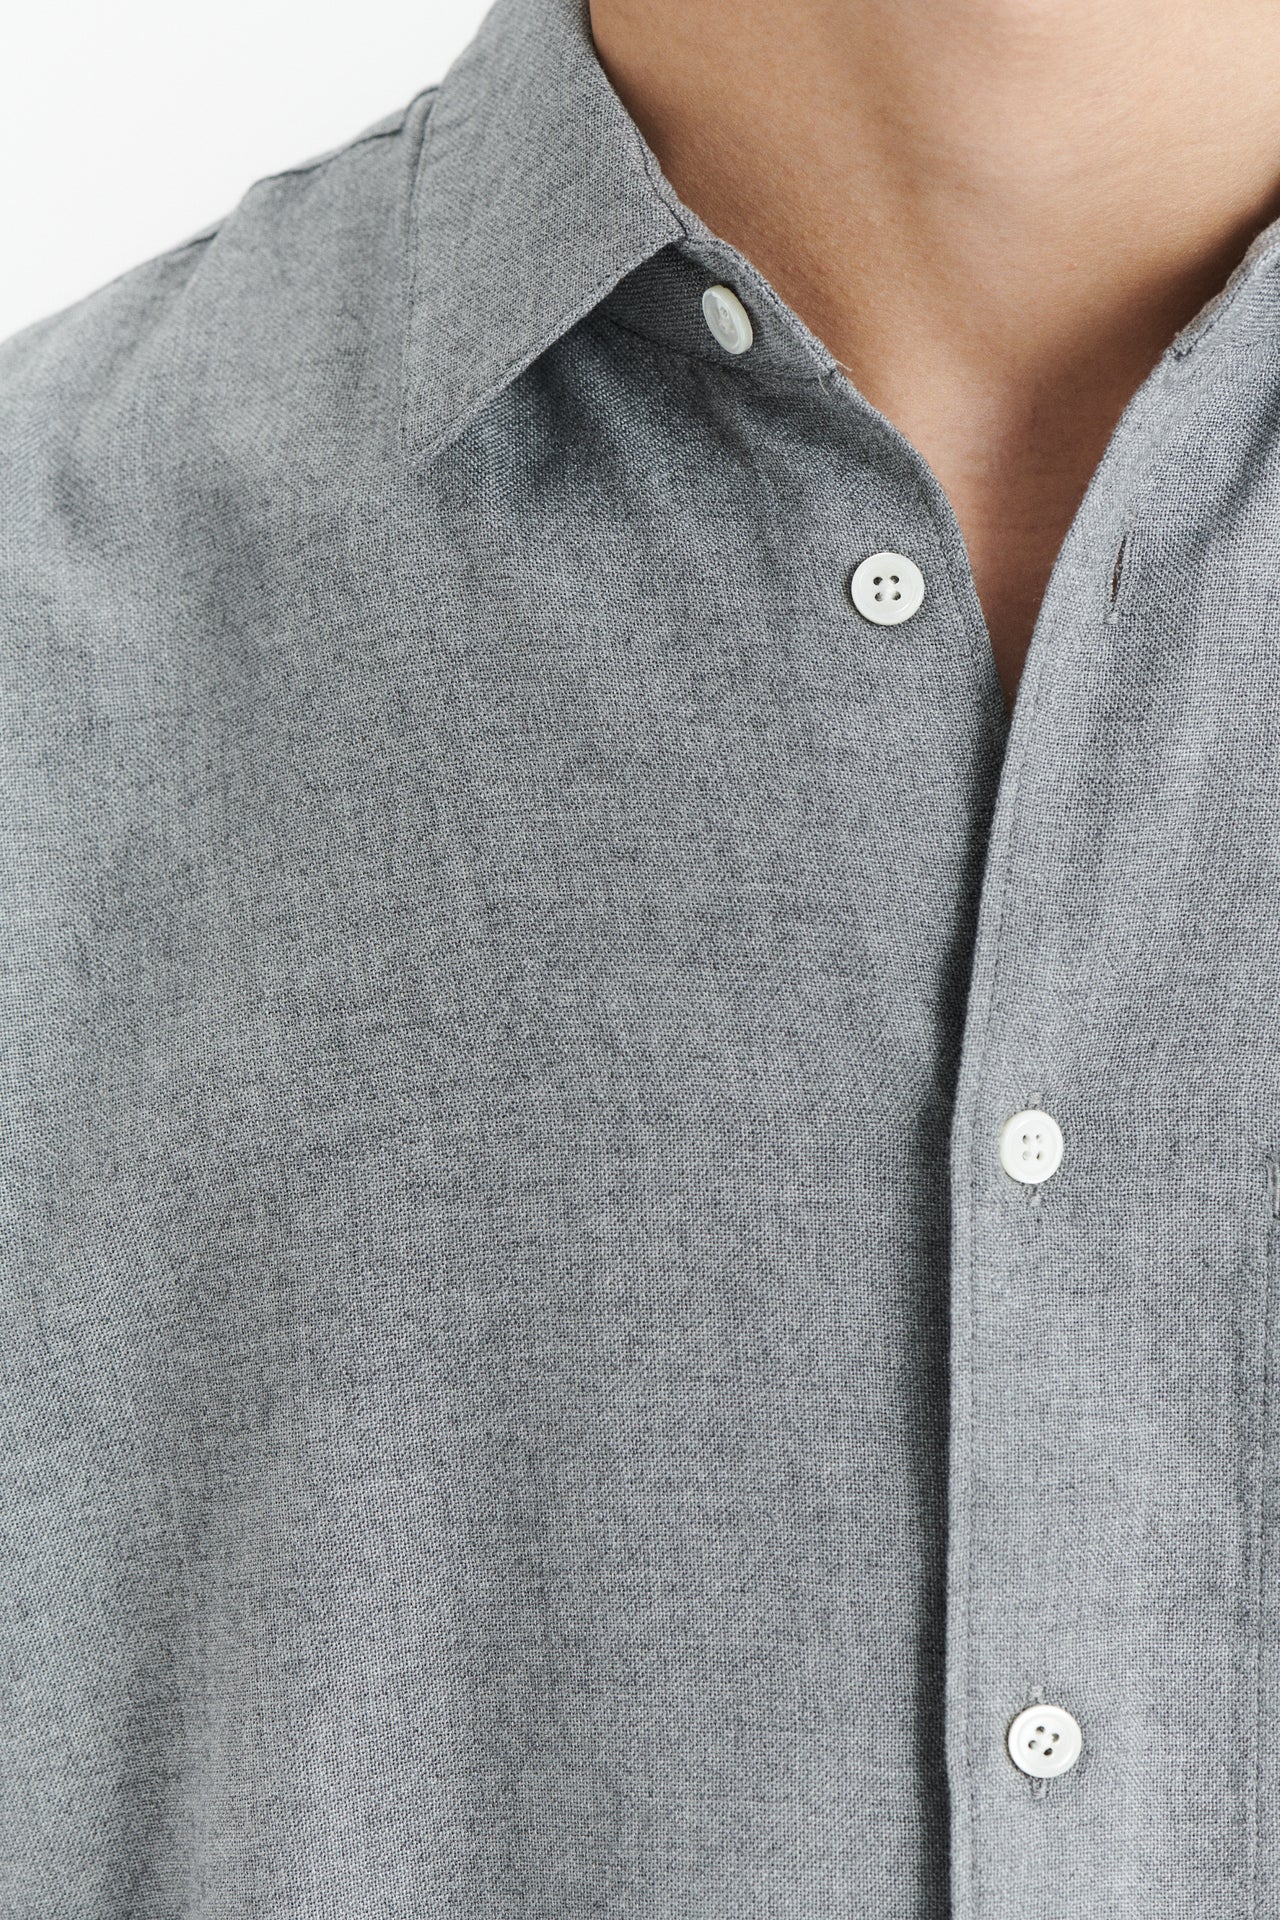 Feel Good Shirt in a Pewter Grey Airy Blend of Portuguese Merino Wool and Modal